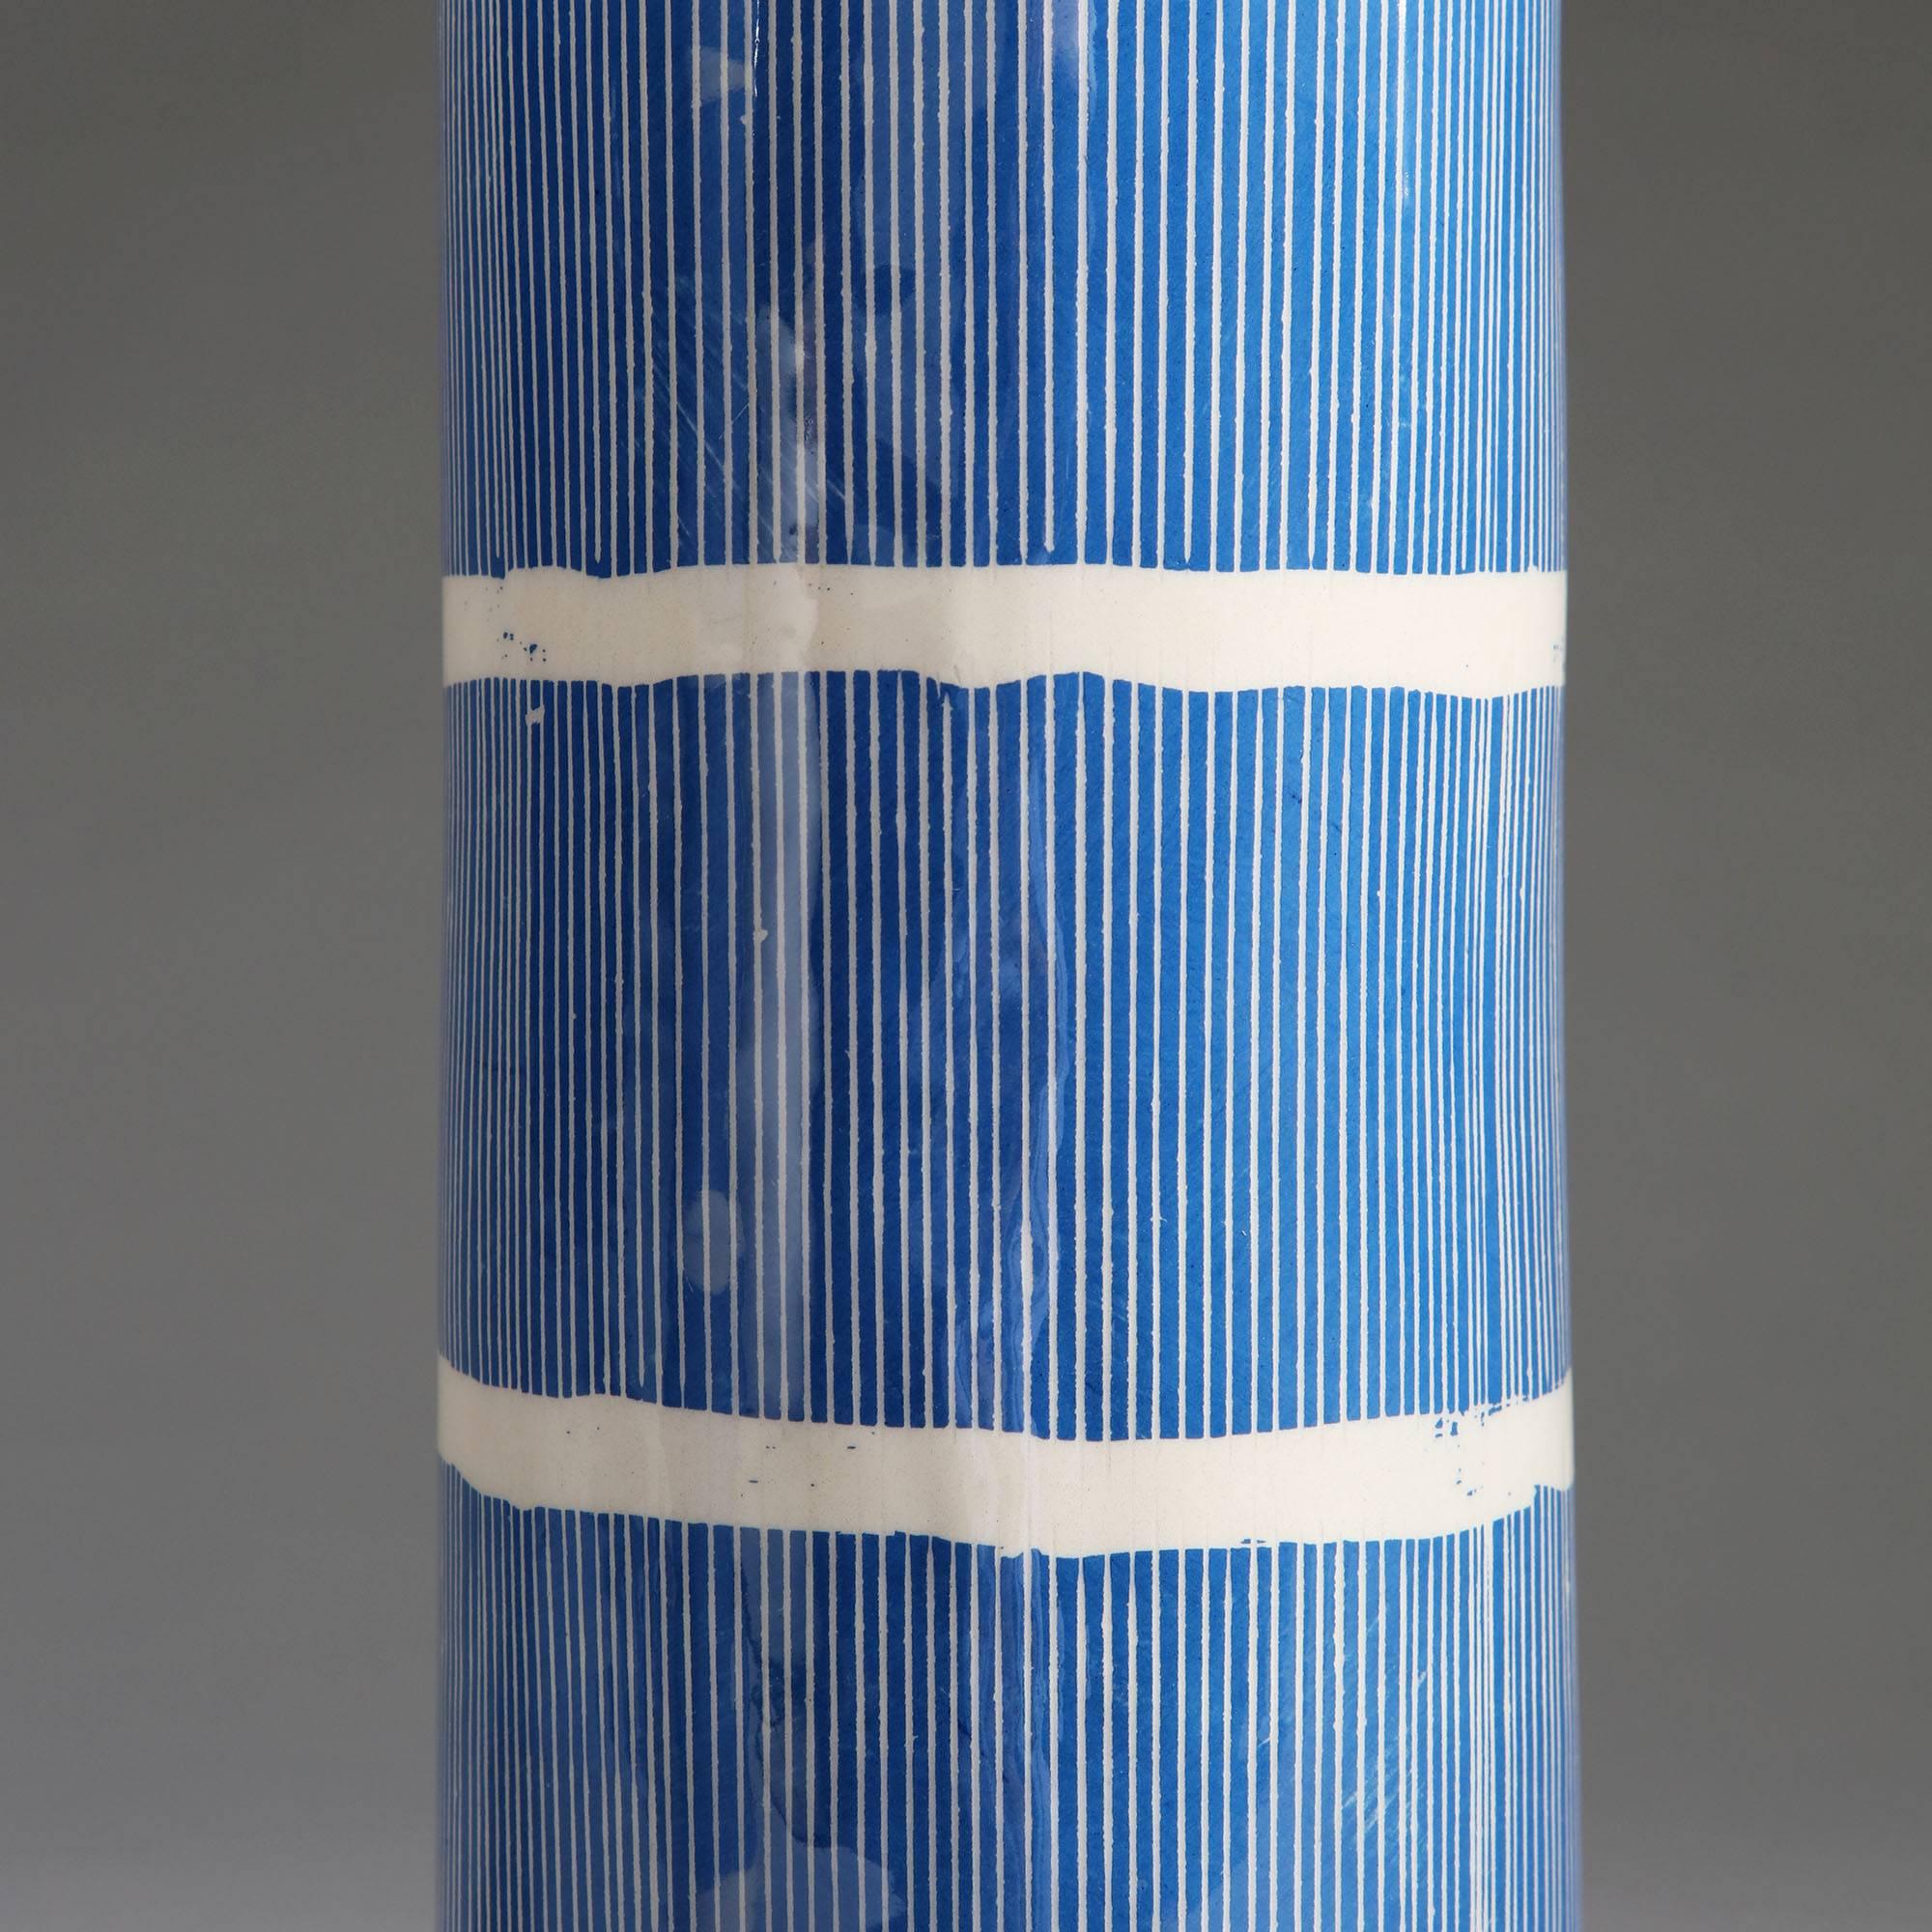 A pair of cylindrical Studio Pottery vases with blue and white striped decoration, now converted as lamps.

Please note: lampshades not included.